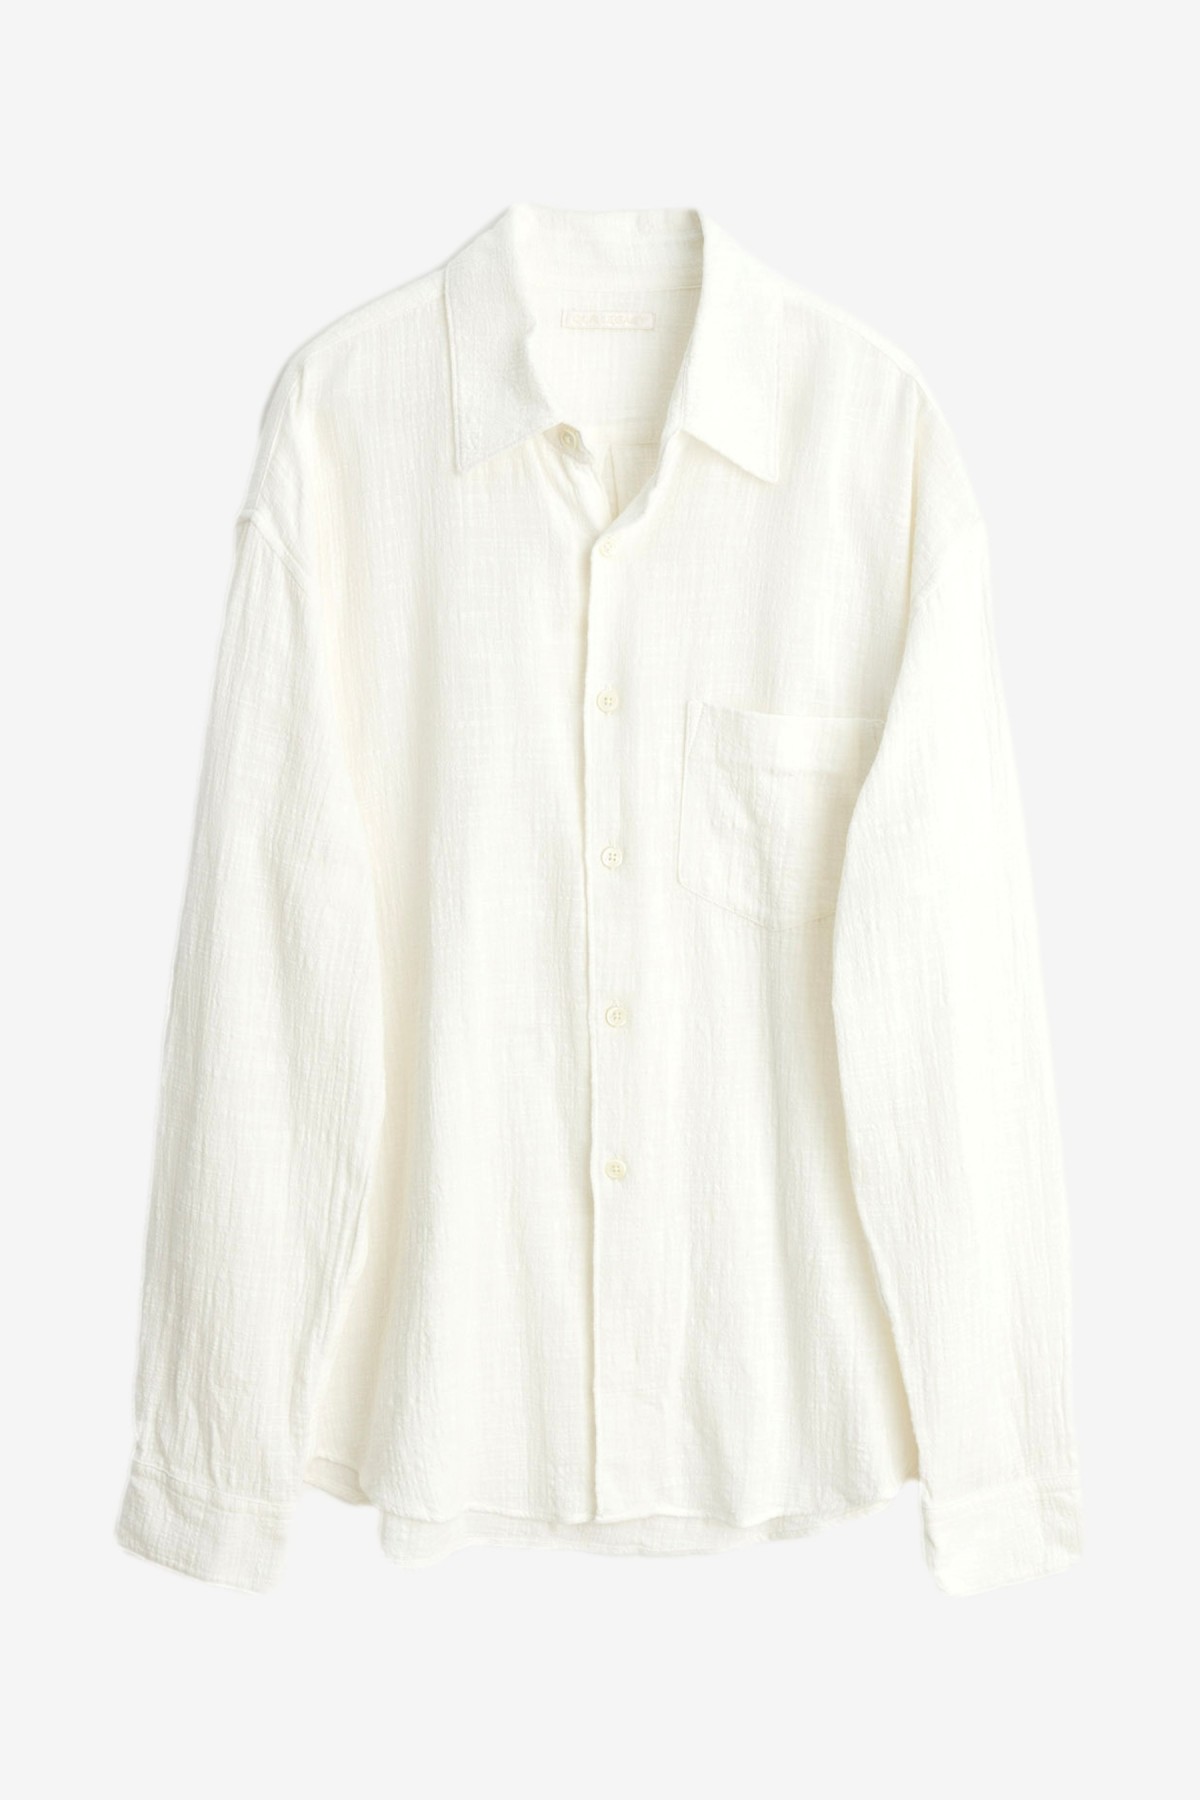 Our Legacy Coco Shirt in Off White Air Cotton